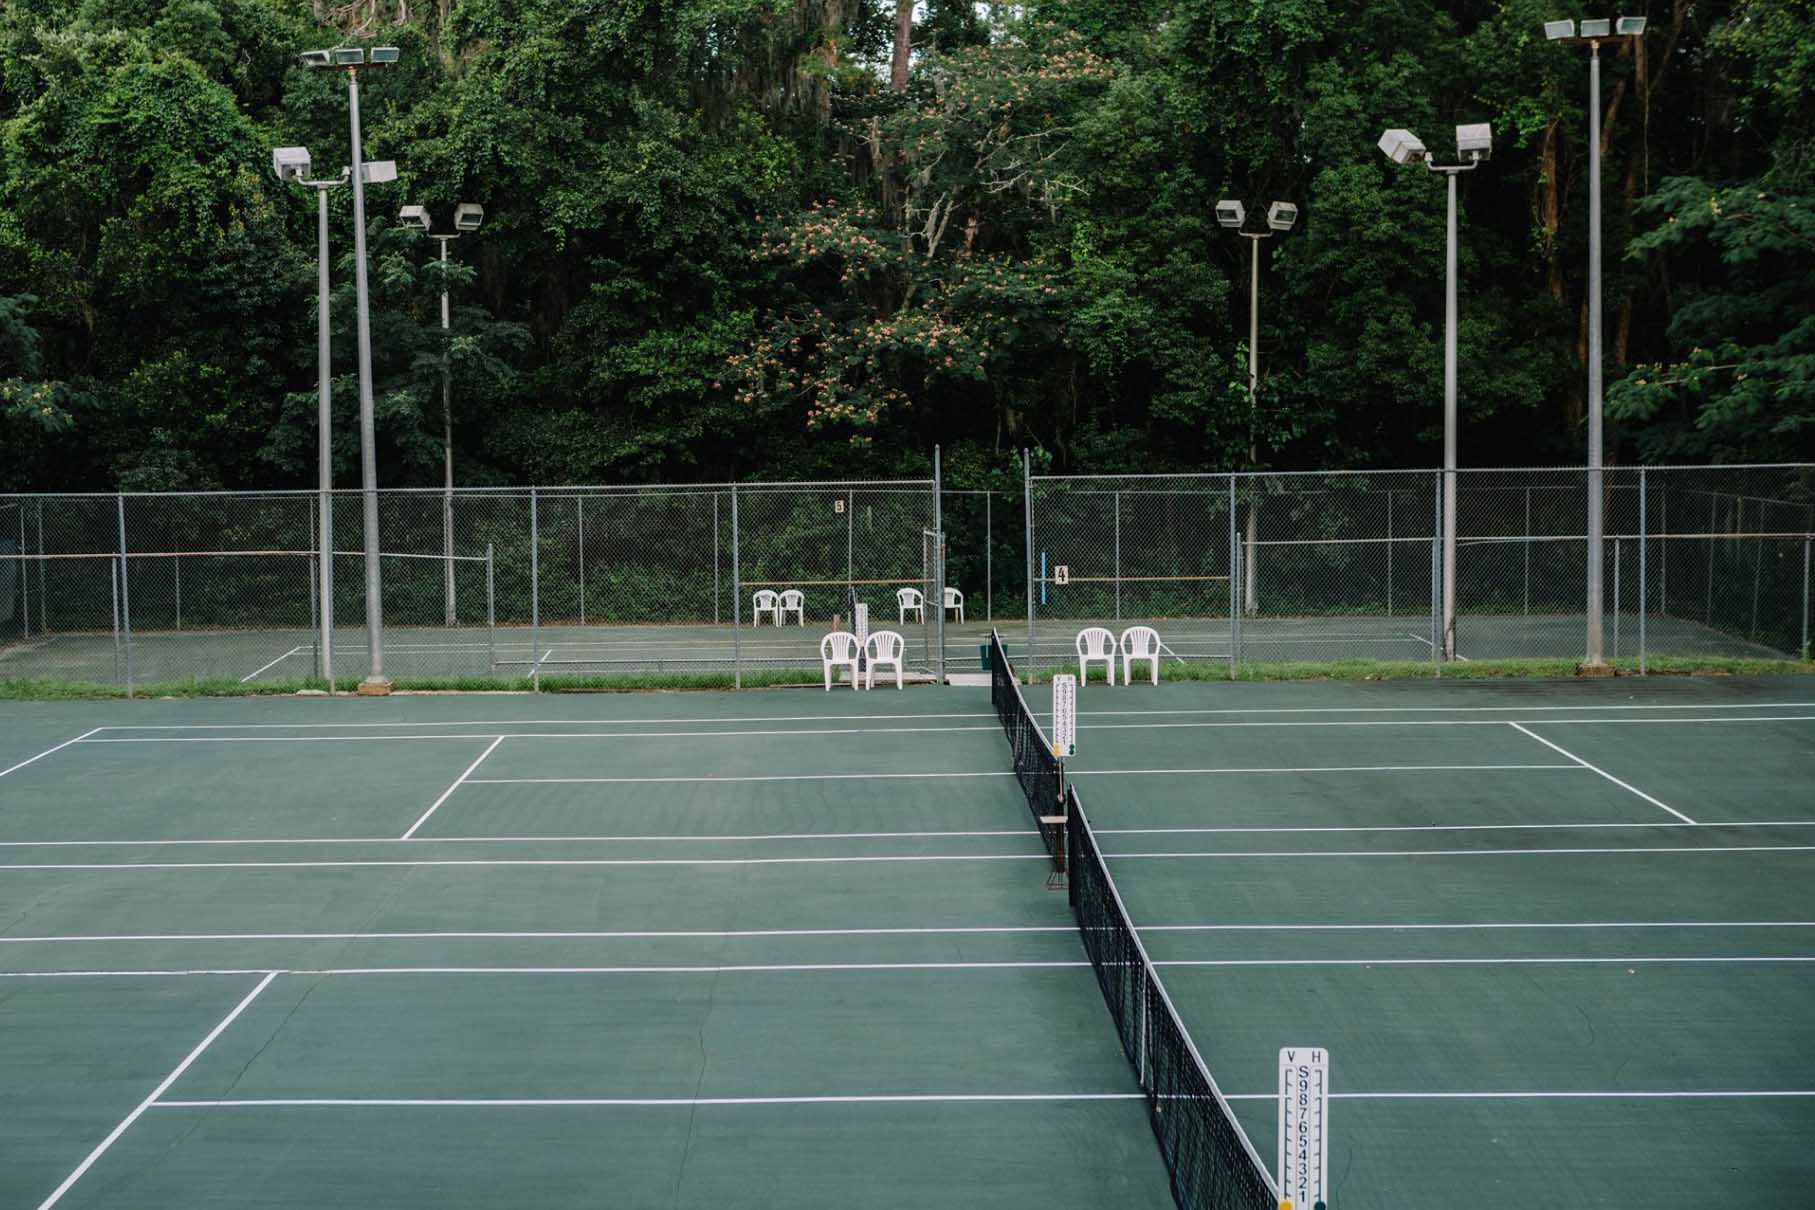 Tennis courts at Capital City Country Club